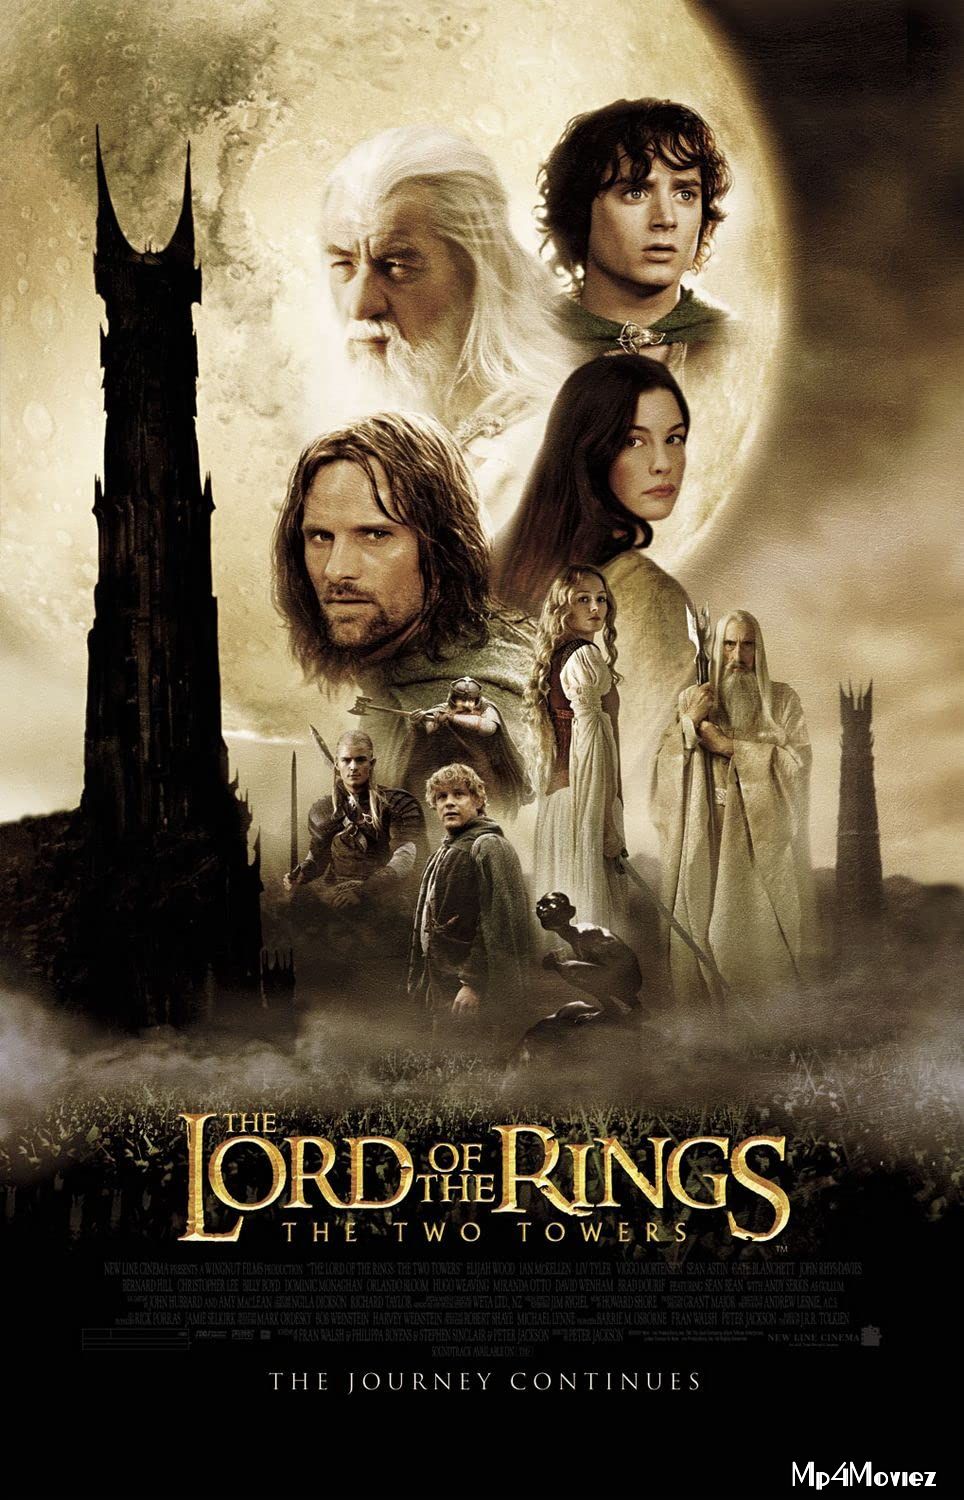 The Lord of the Rings The Two Towers (2002) Extended Hindi Dubbed BRRip download full movie